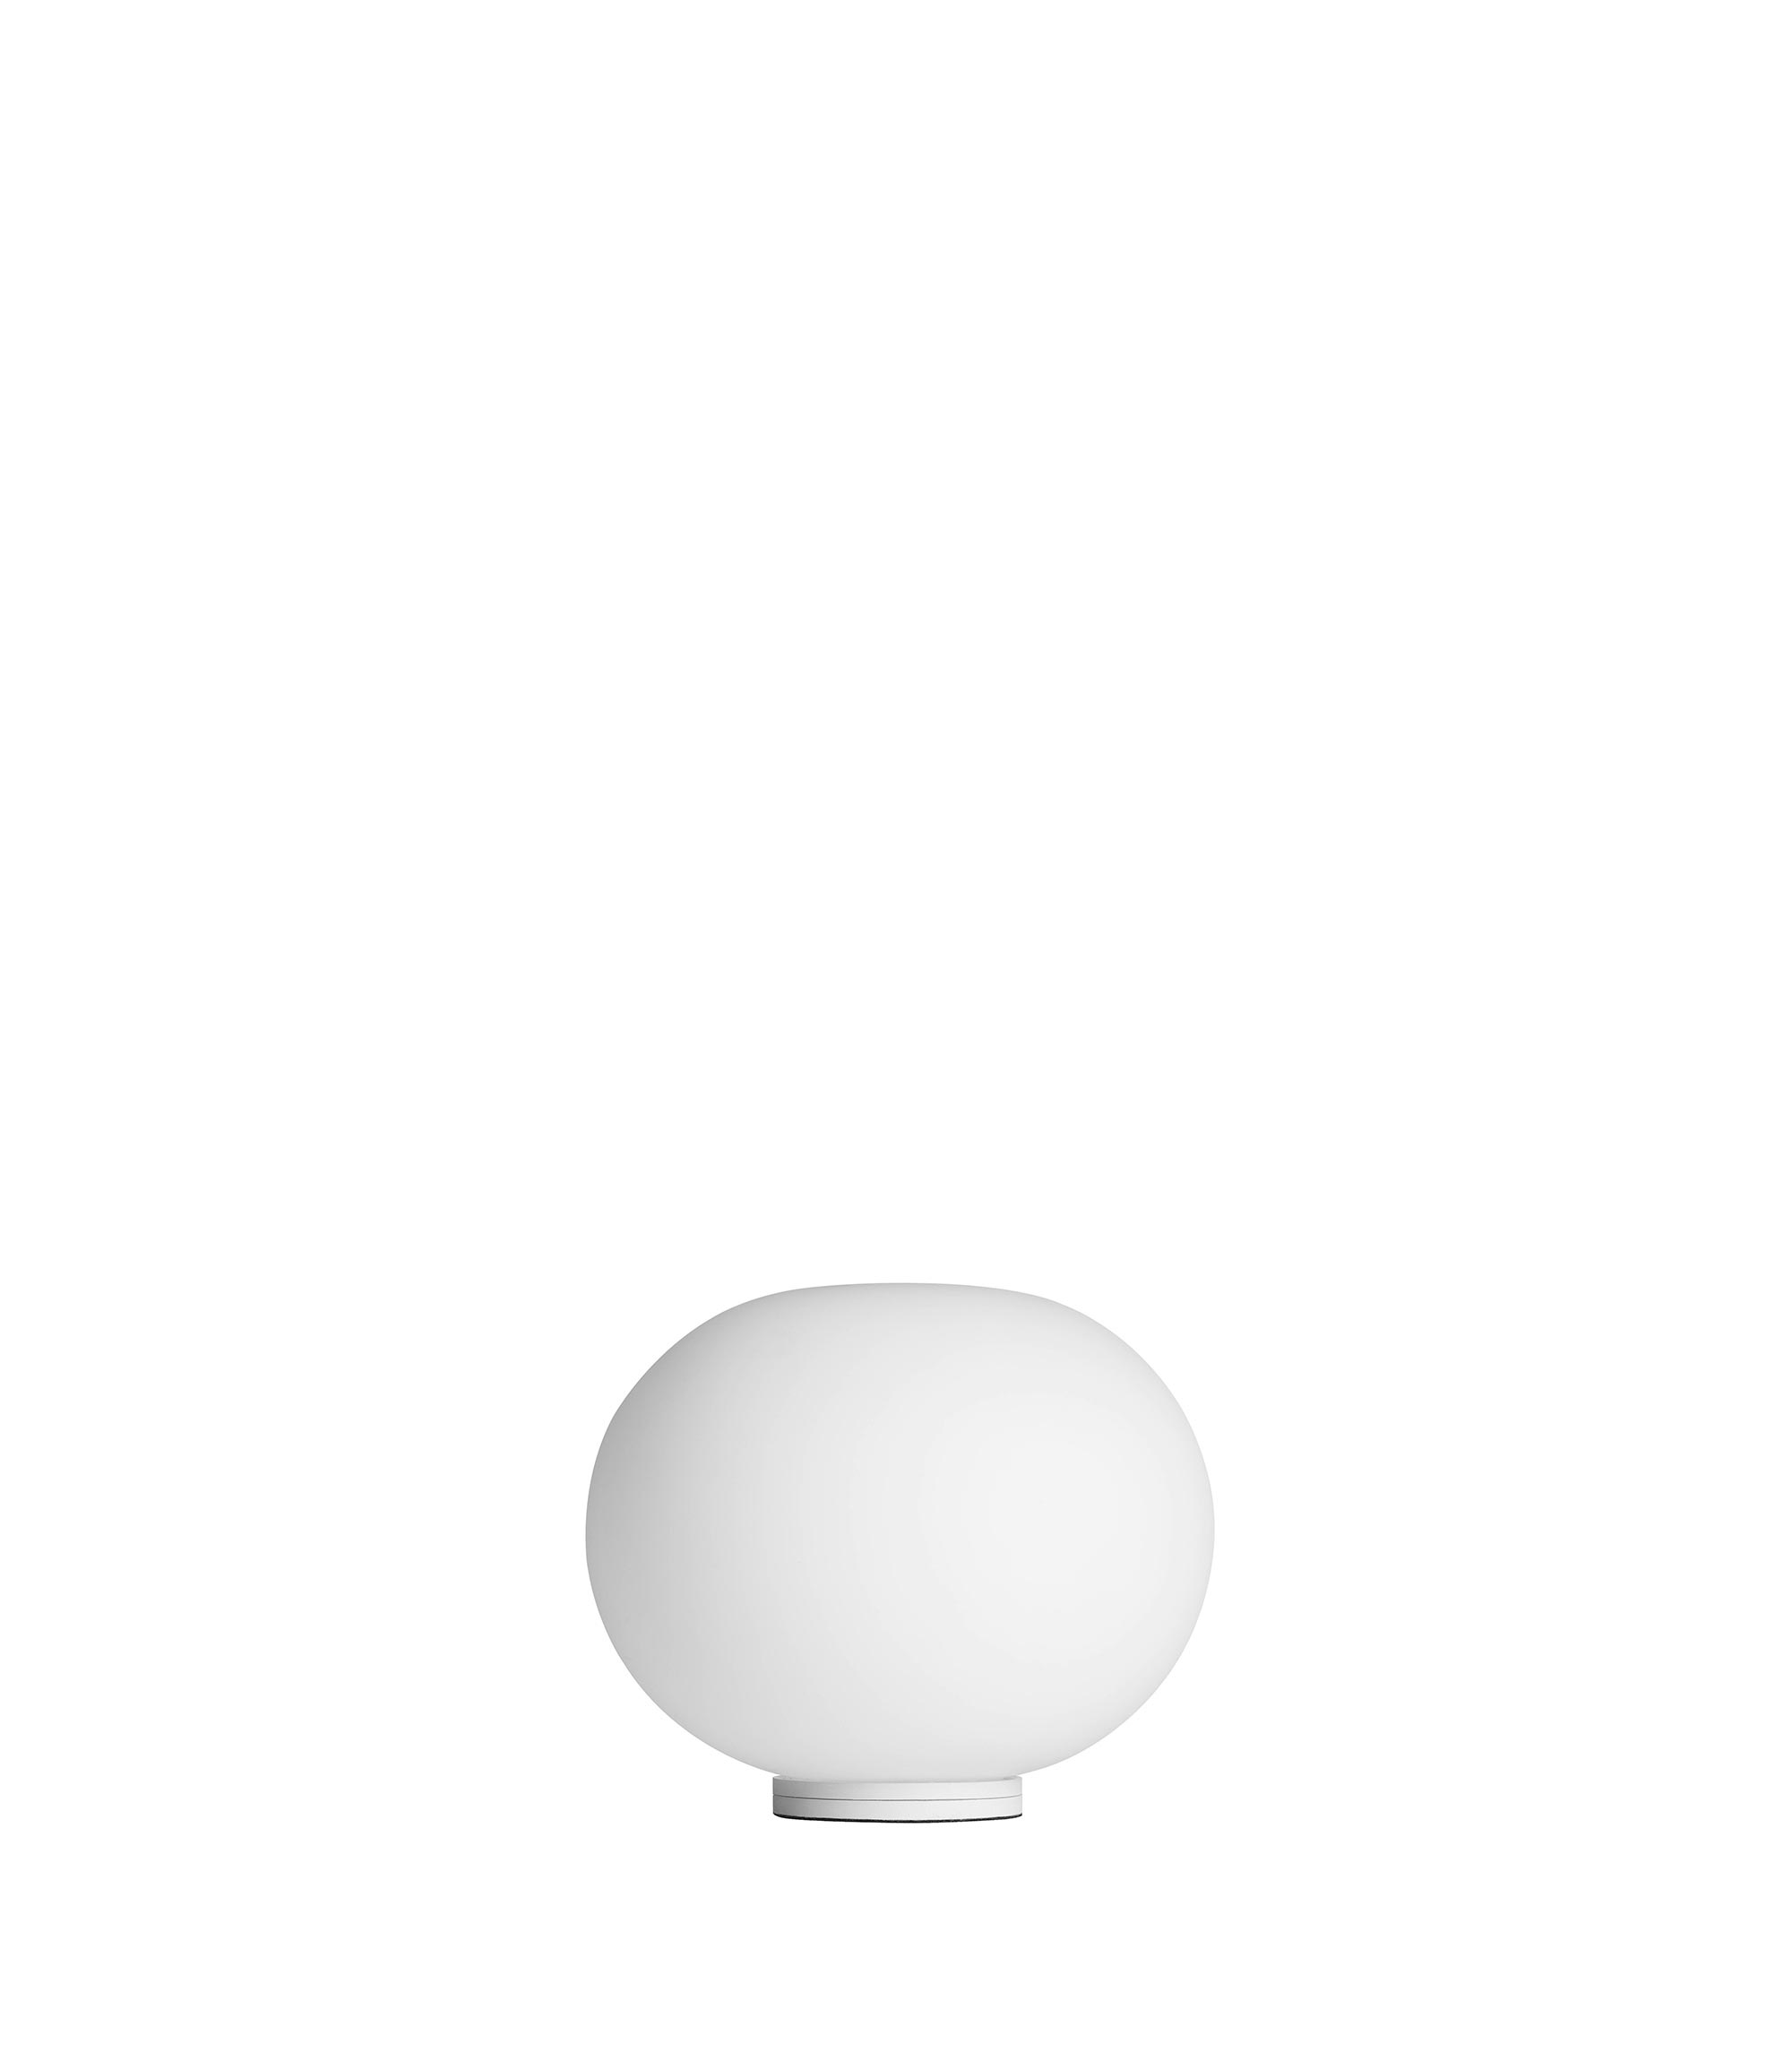 F6255007: Discover the Flos table lamp model Miss K Soft